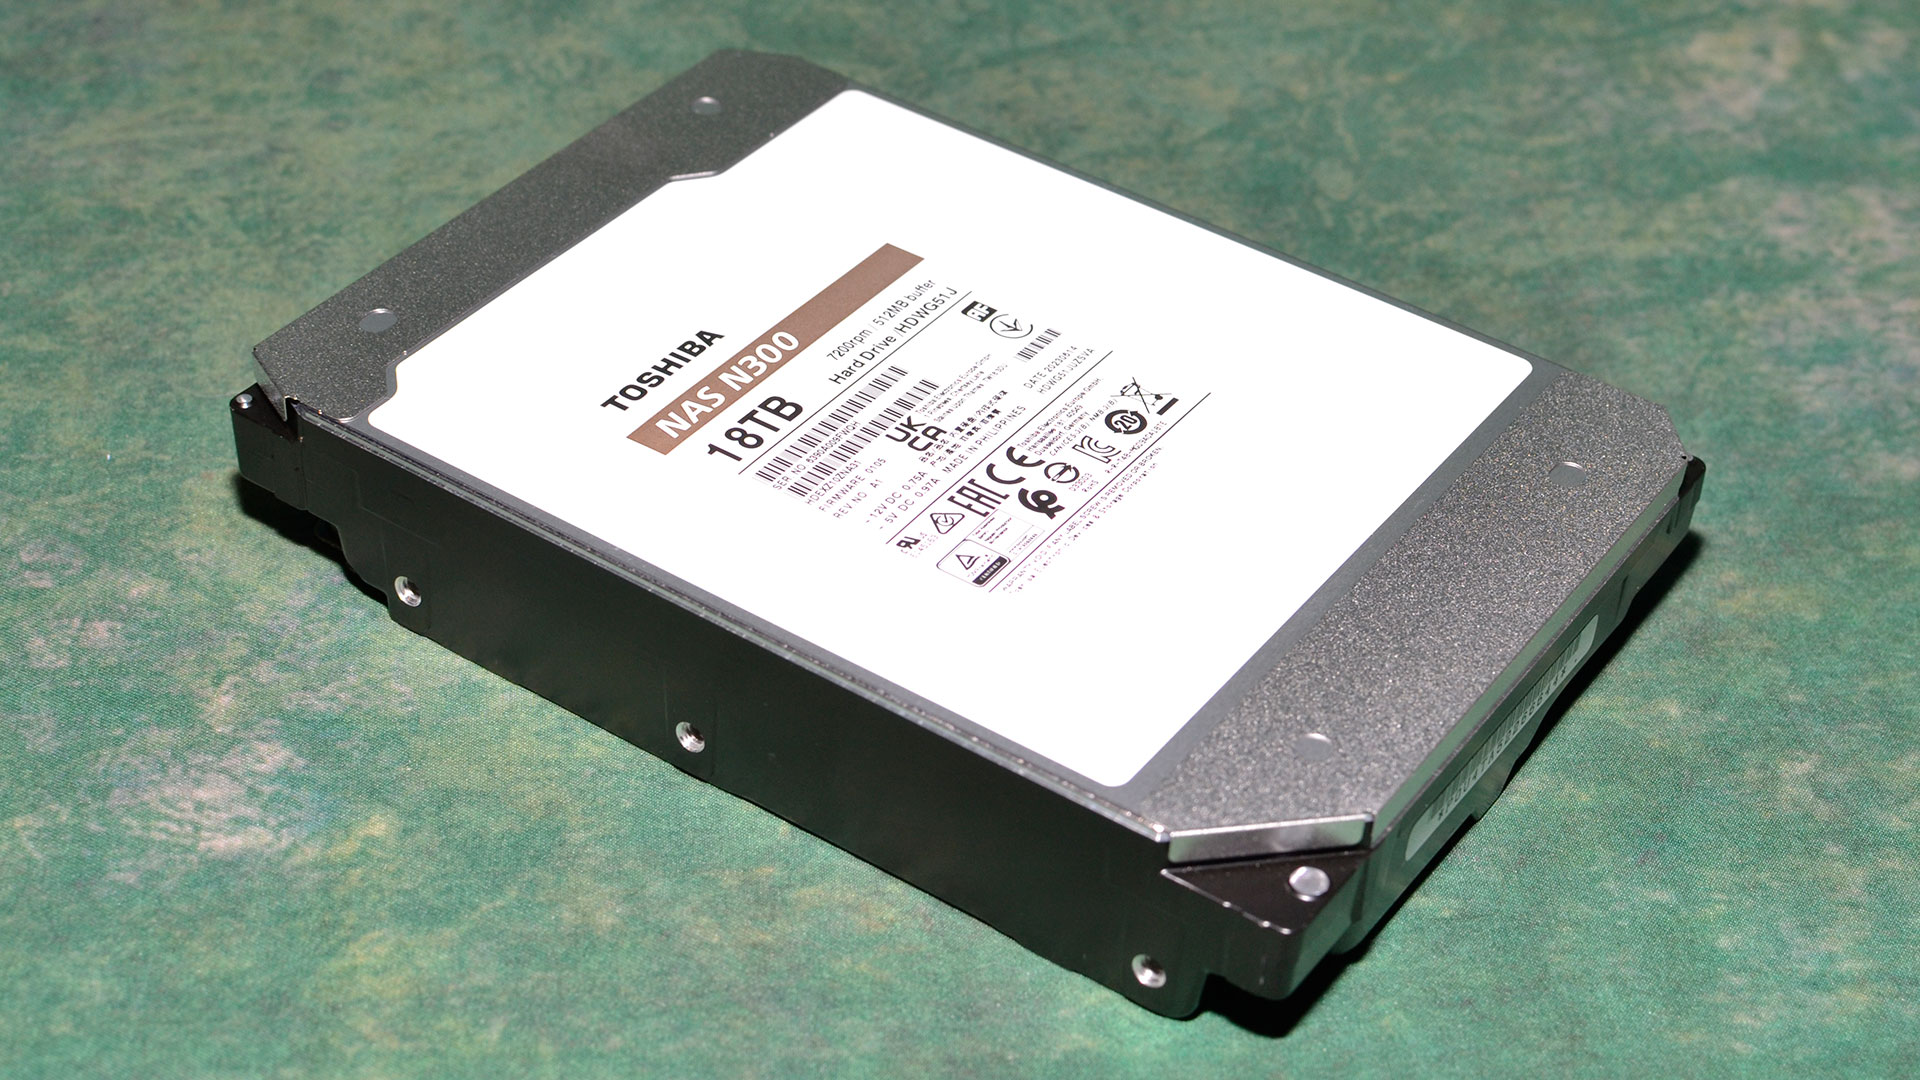 Toshiba N300 18TB HDD review: This 'budget' NAS drive gets the job